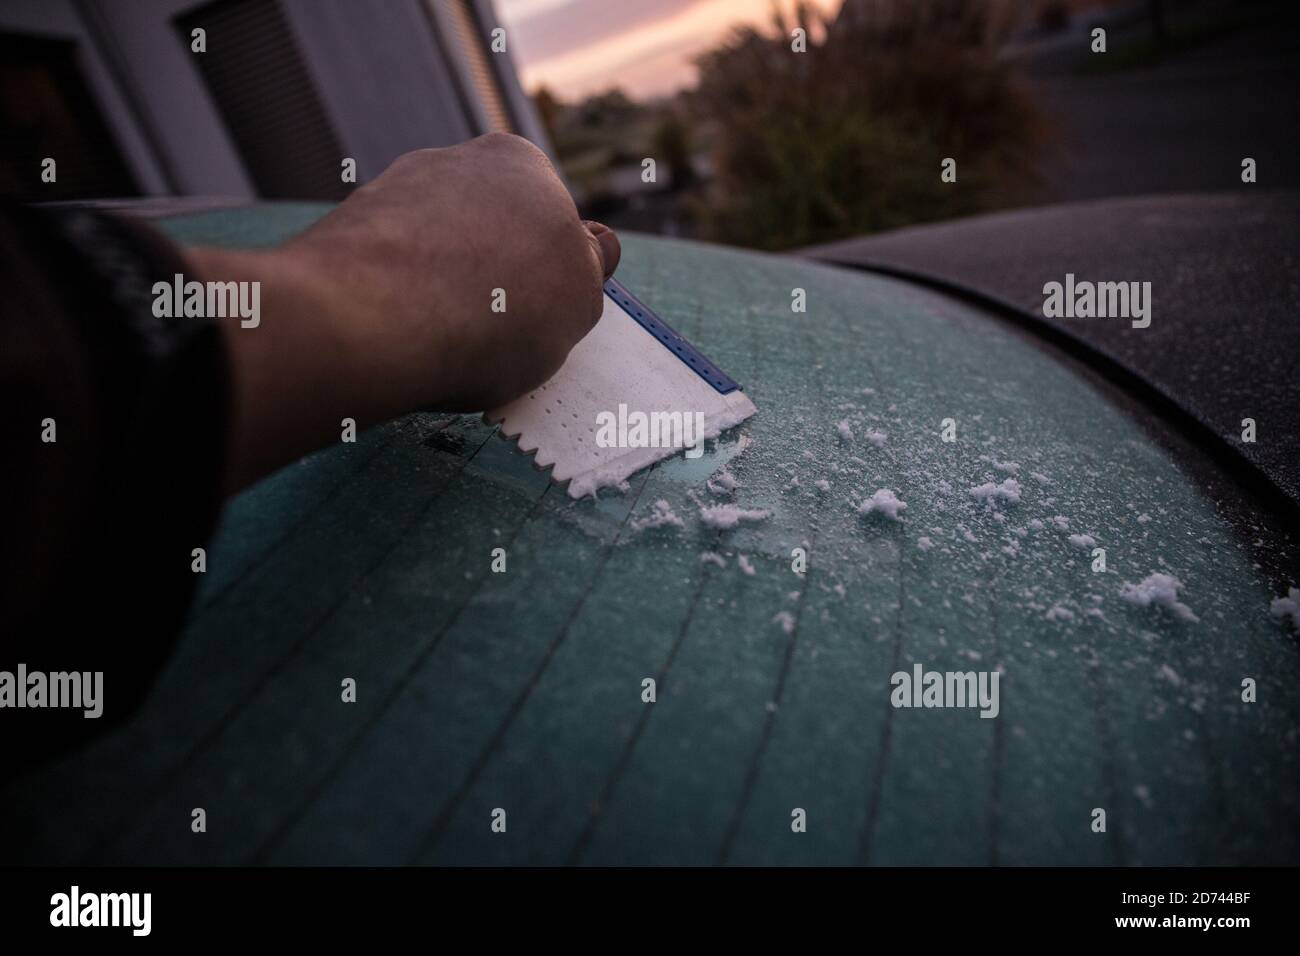 Bamberg, Germany October 20, 2020: Symbolbilder - 2020 - First frost in  Trosdorf near Bamberg on October 20. Car windows frozen over,  feature/symbol/symbol photo/characteristic/detail/